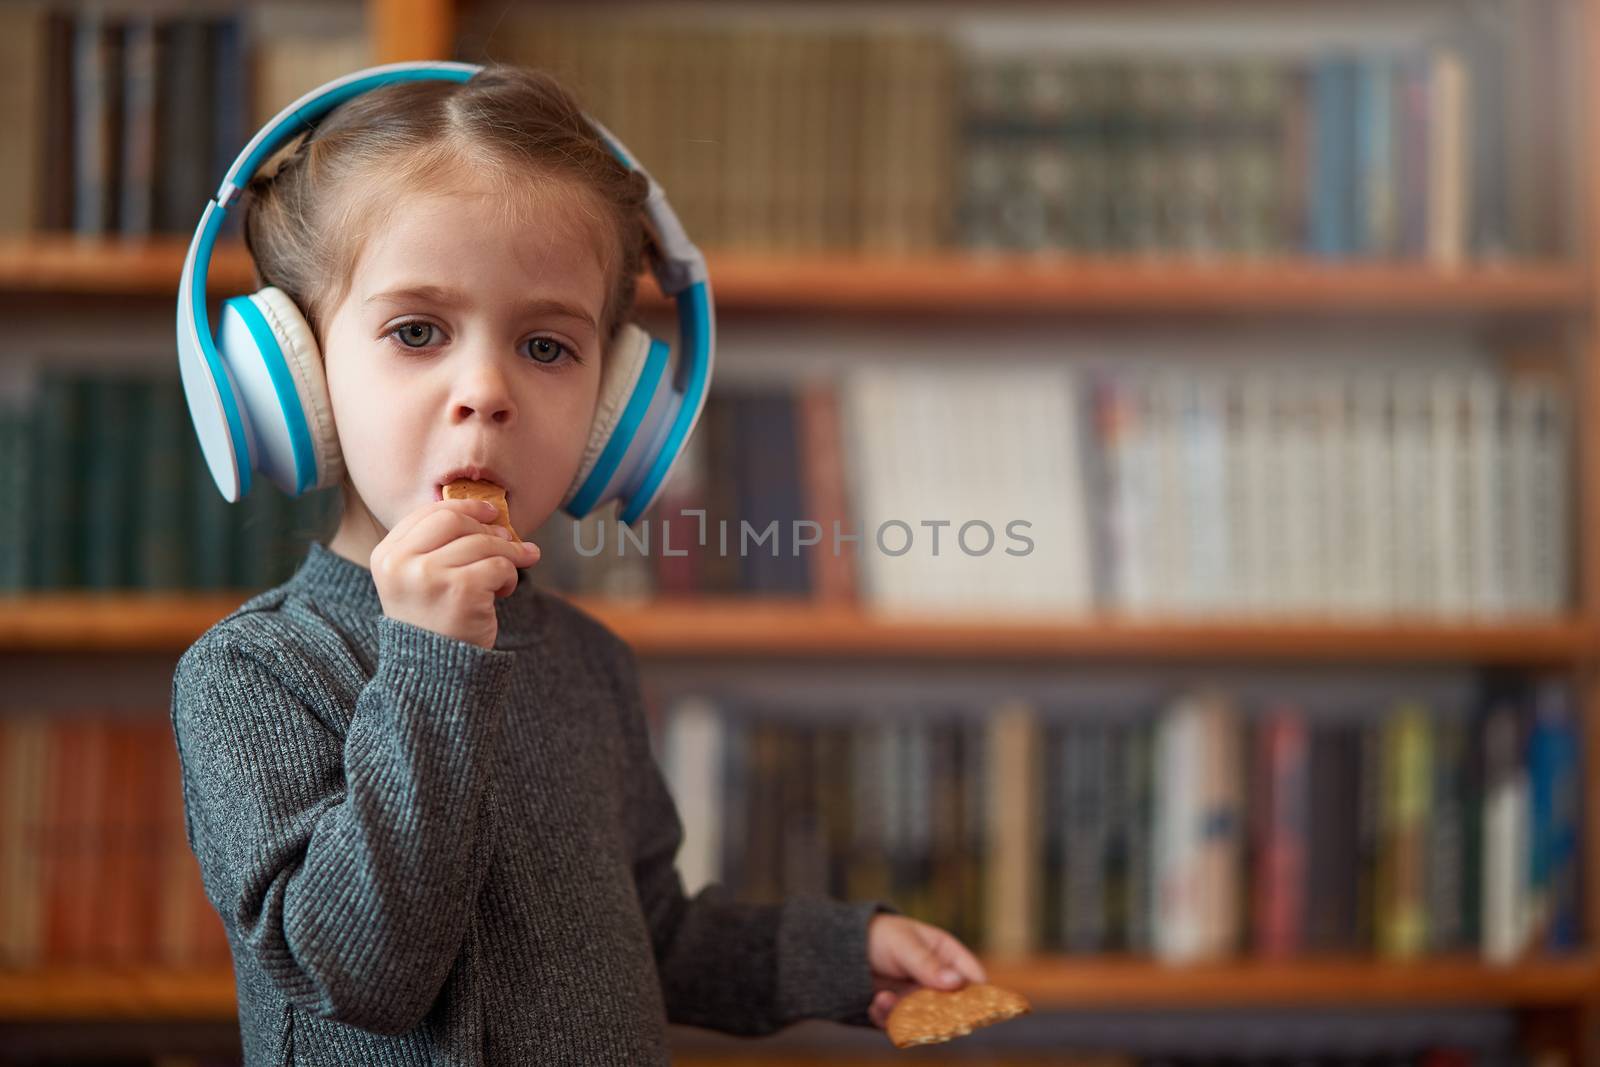 Cute Caucasian little girl in big white headphones listens music in the interior against the background of bookshelves Modern children. Happy childhood with technology Child spends free time at home.